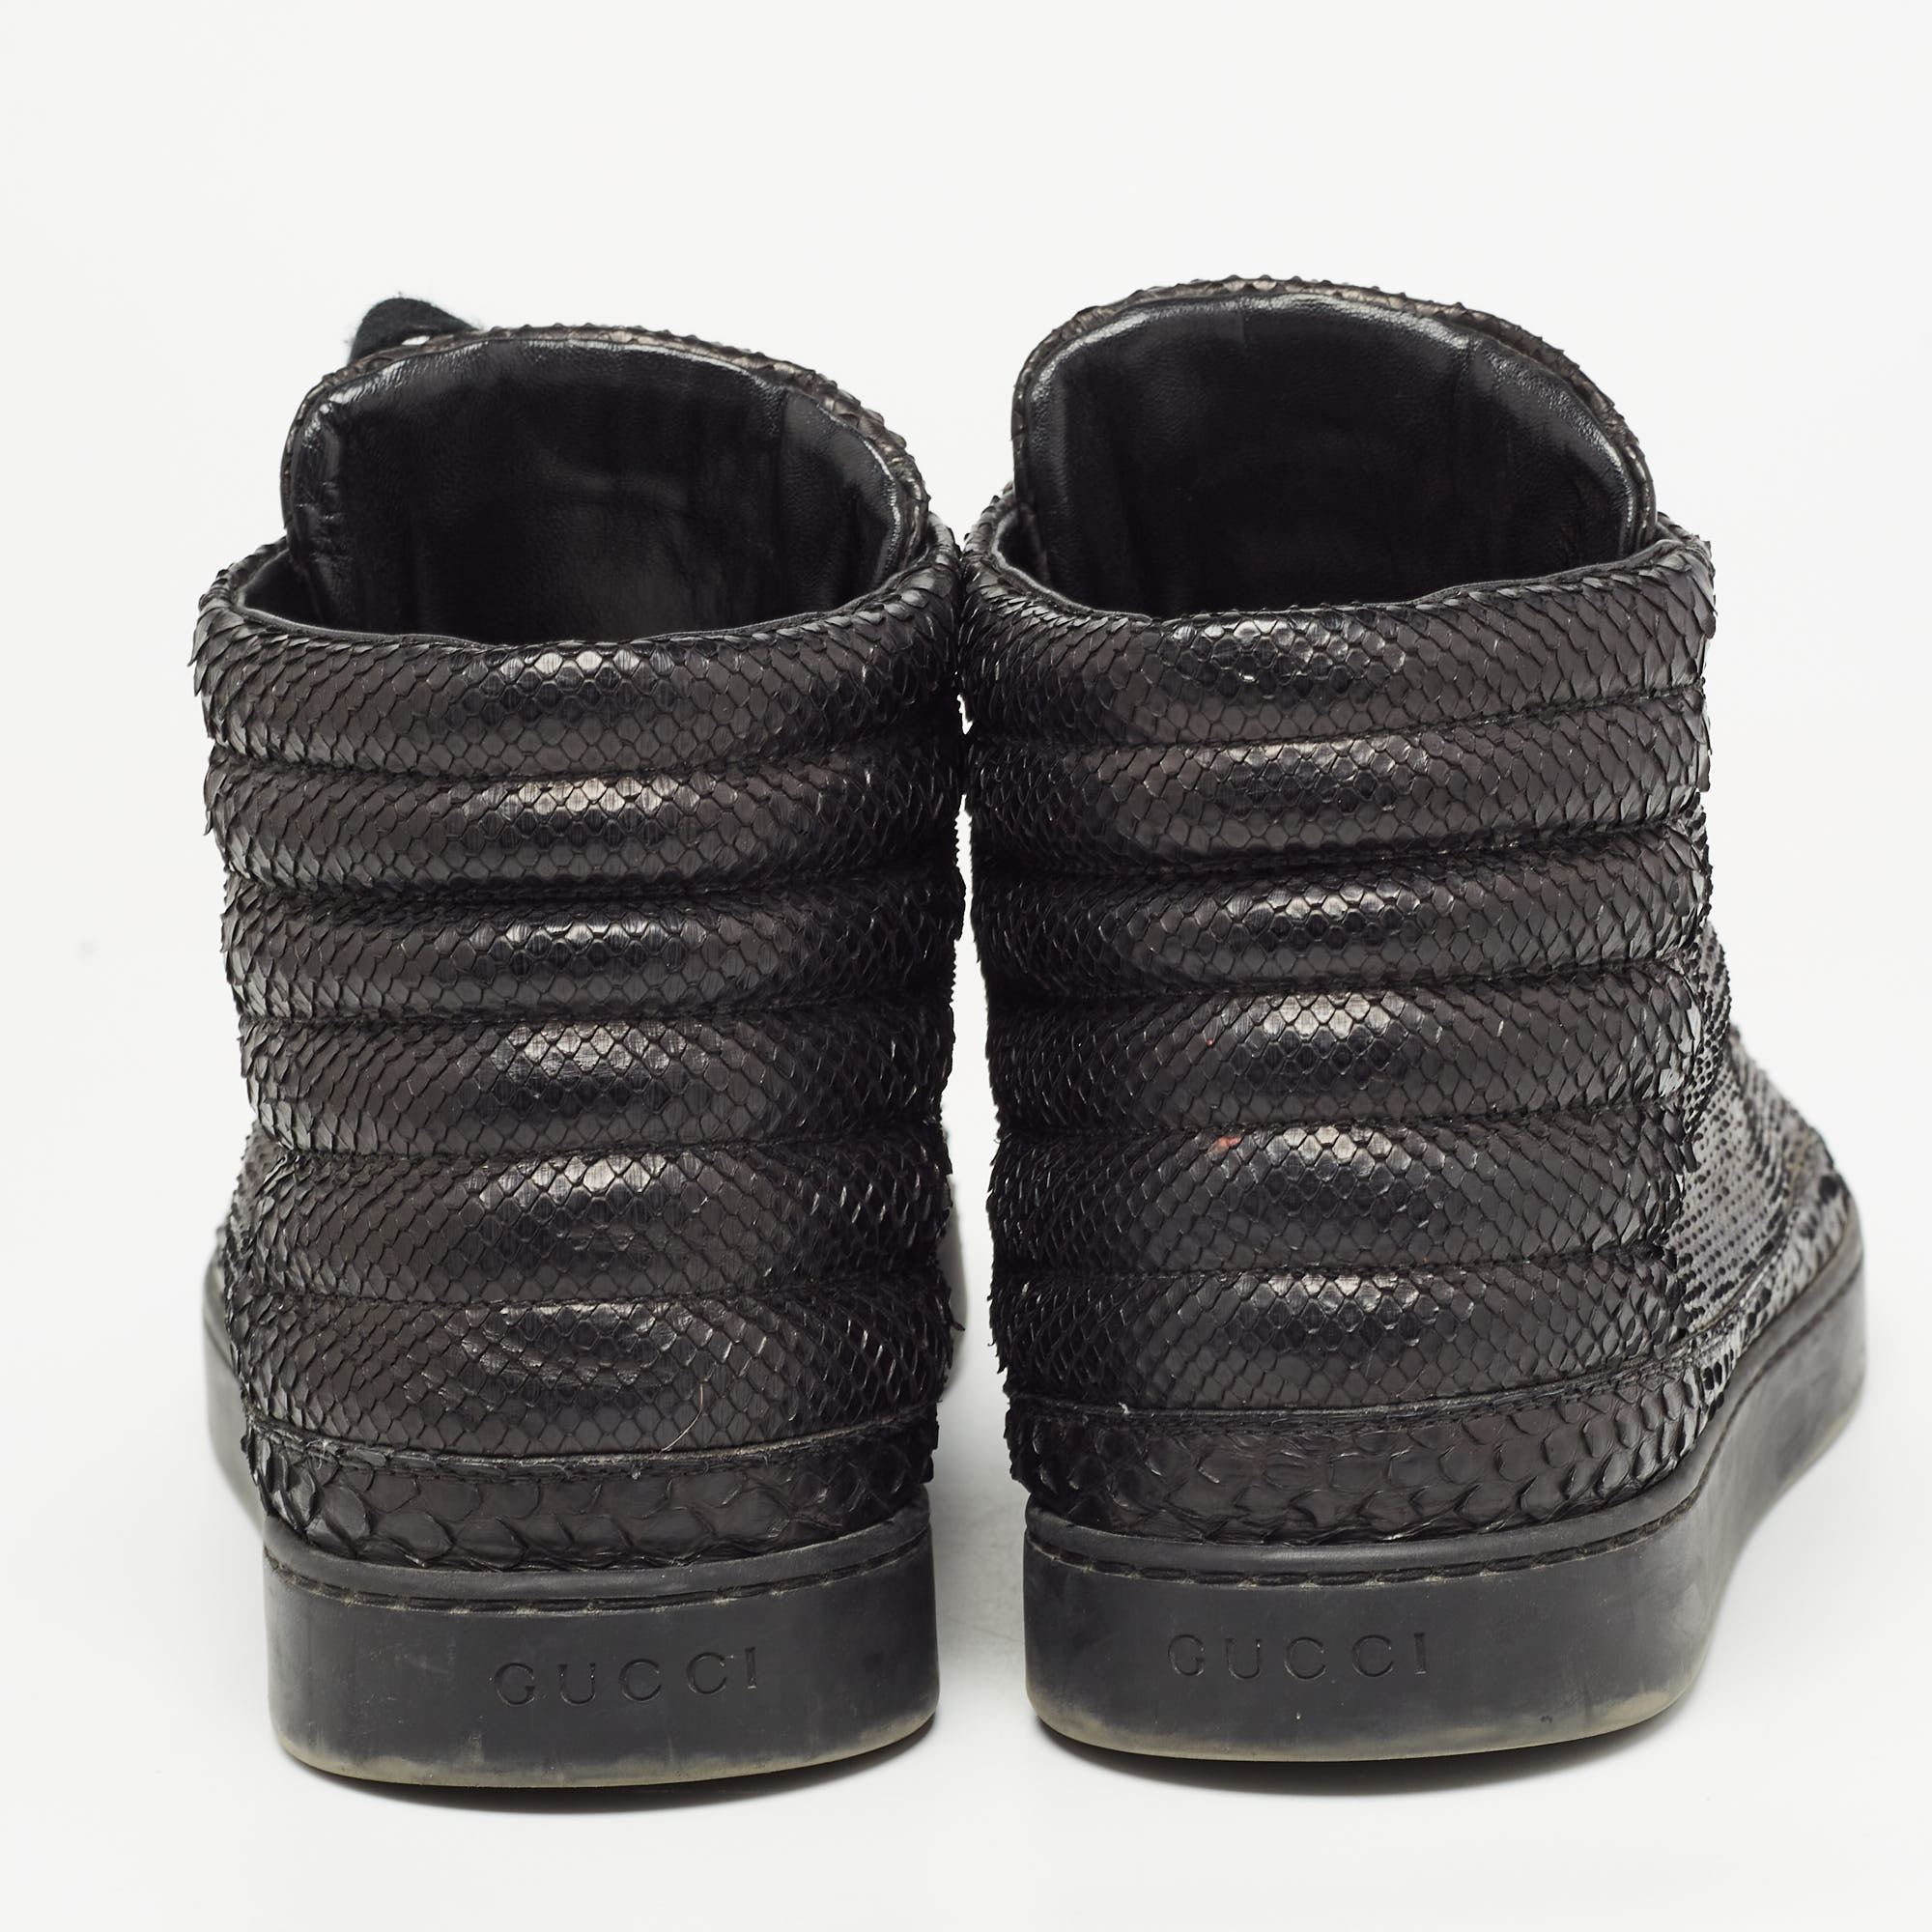 Gucci Black Python High Top Sneakers Size 44.5